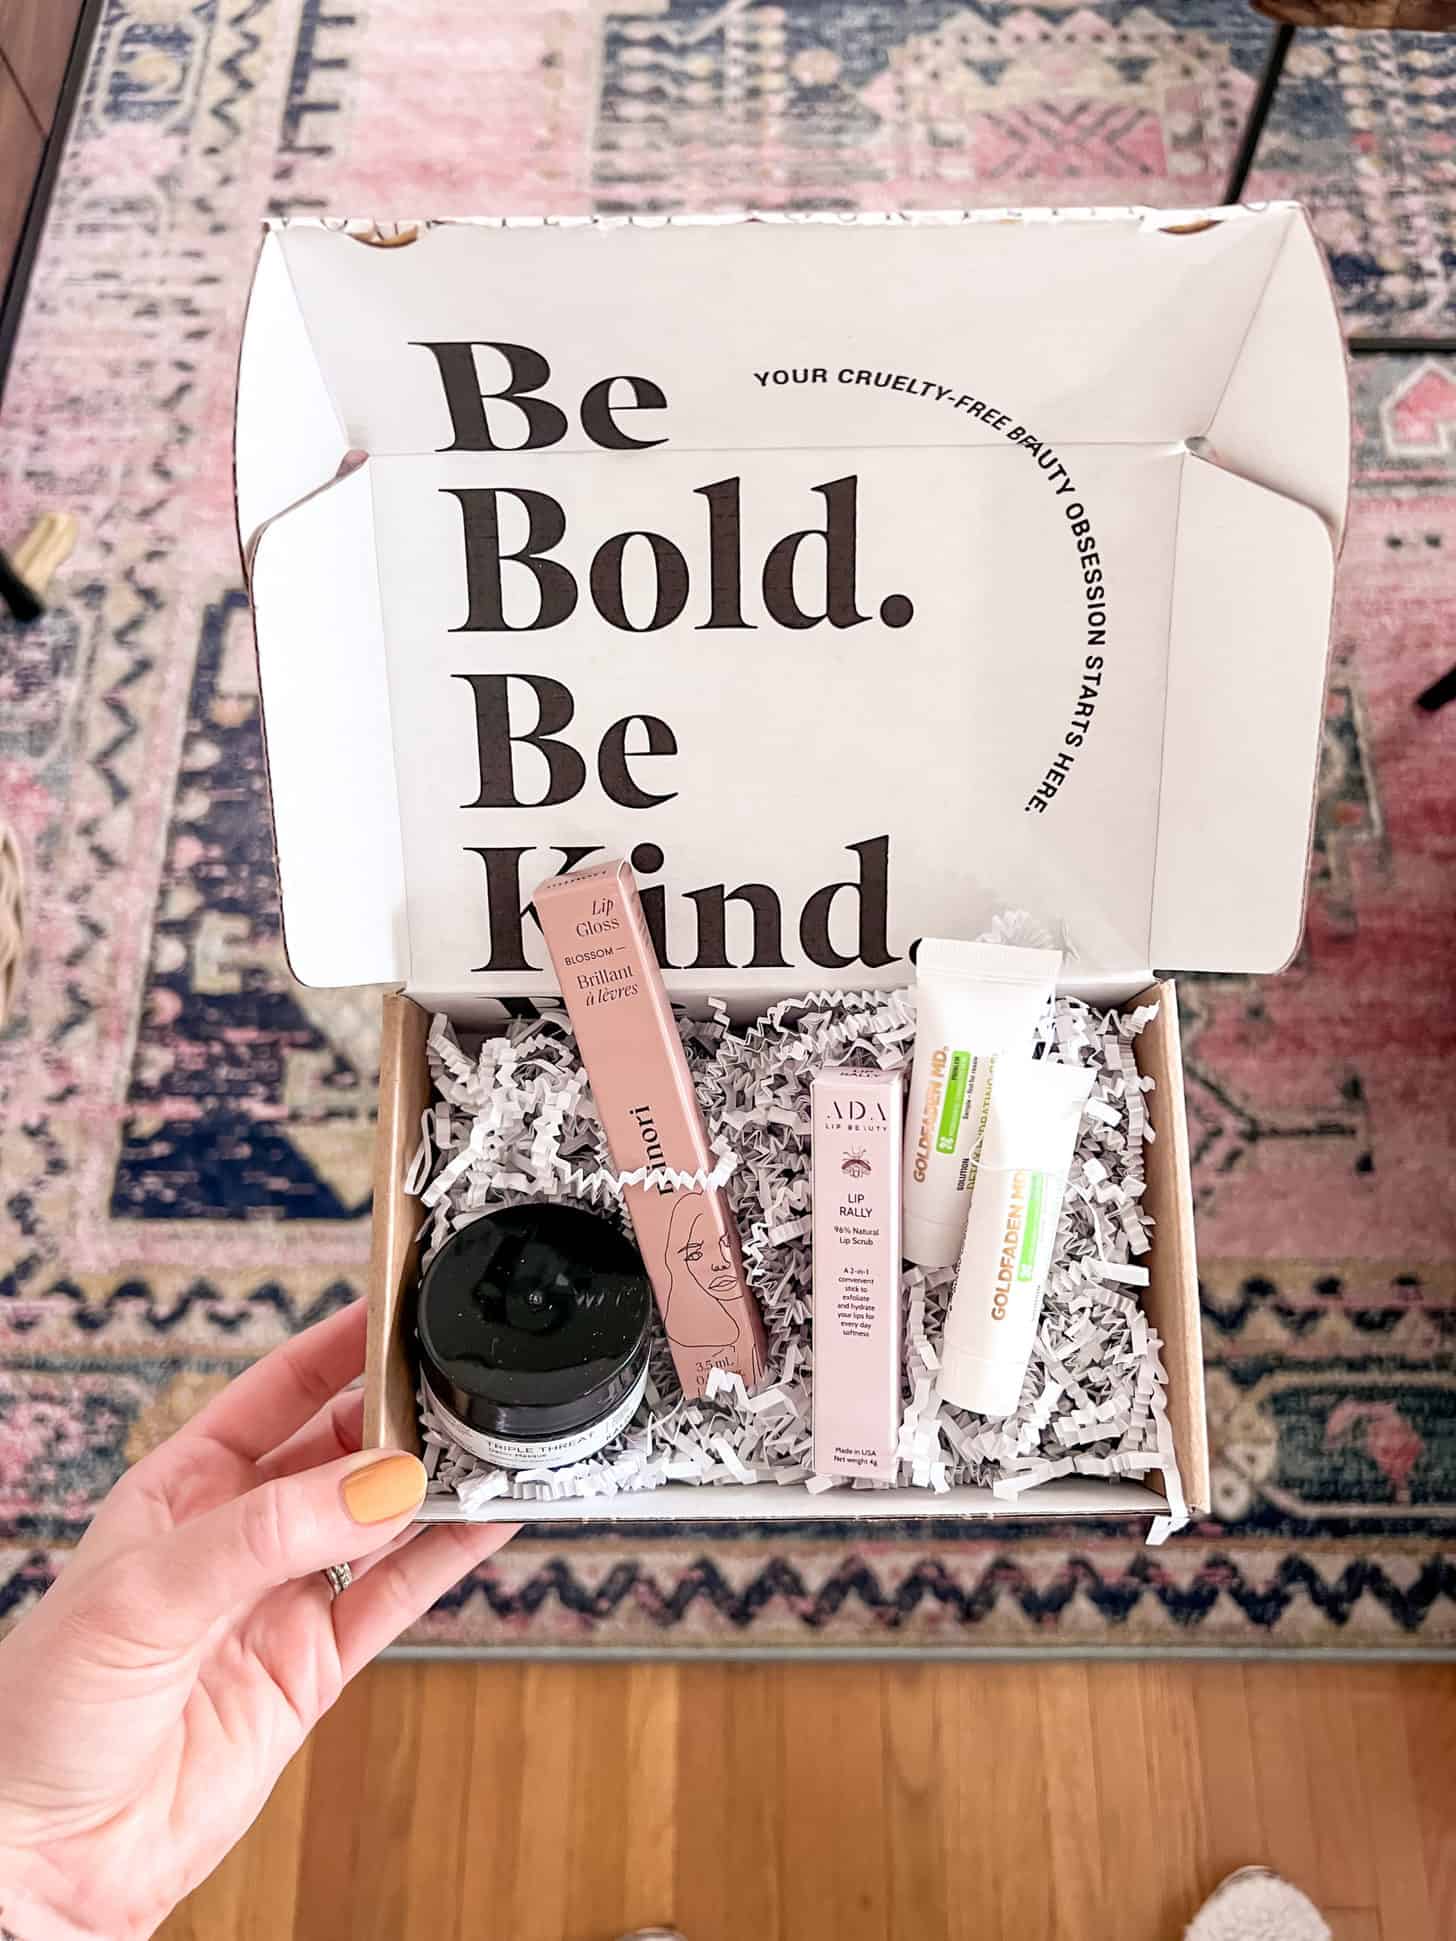 A box of clean beauty supplies is held in front of a colorful rug